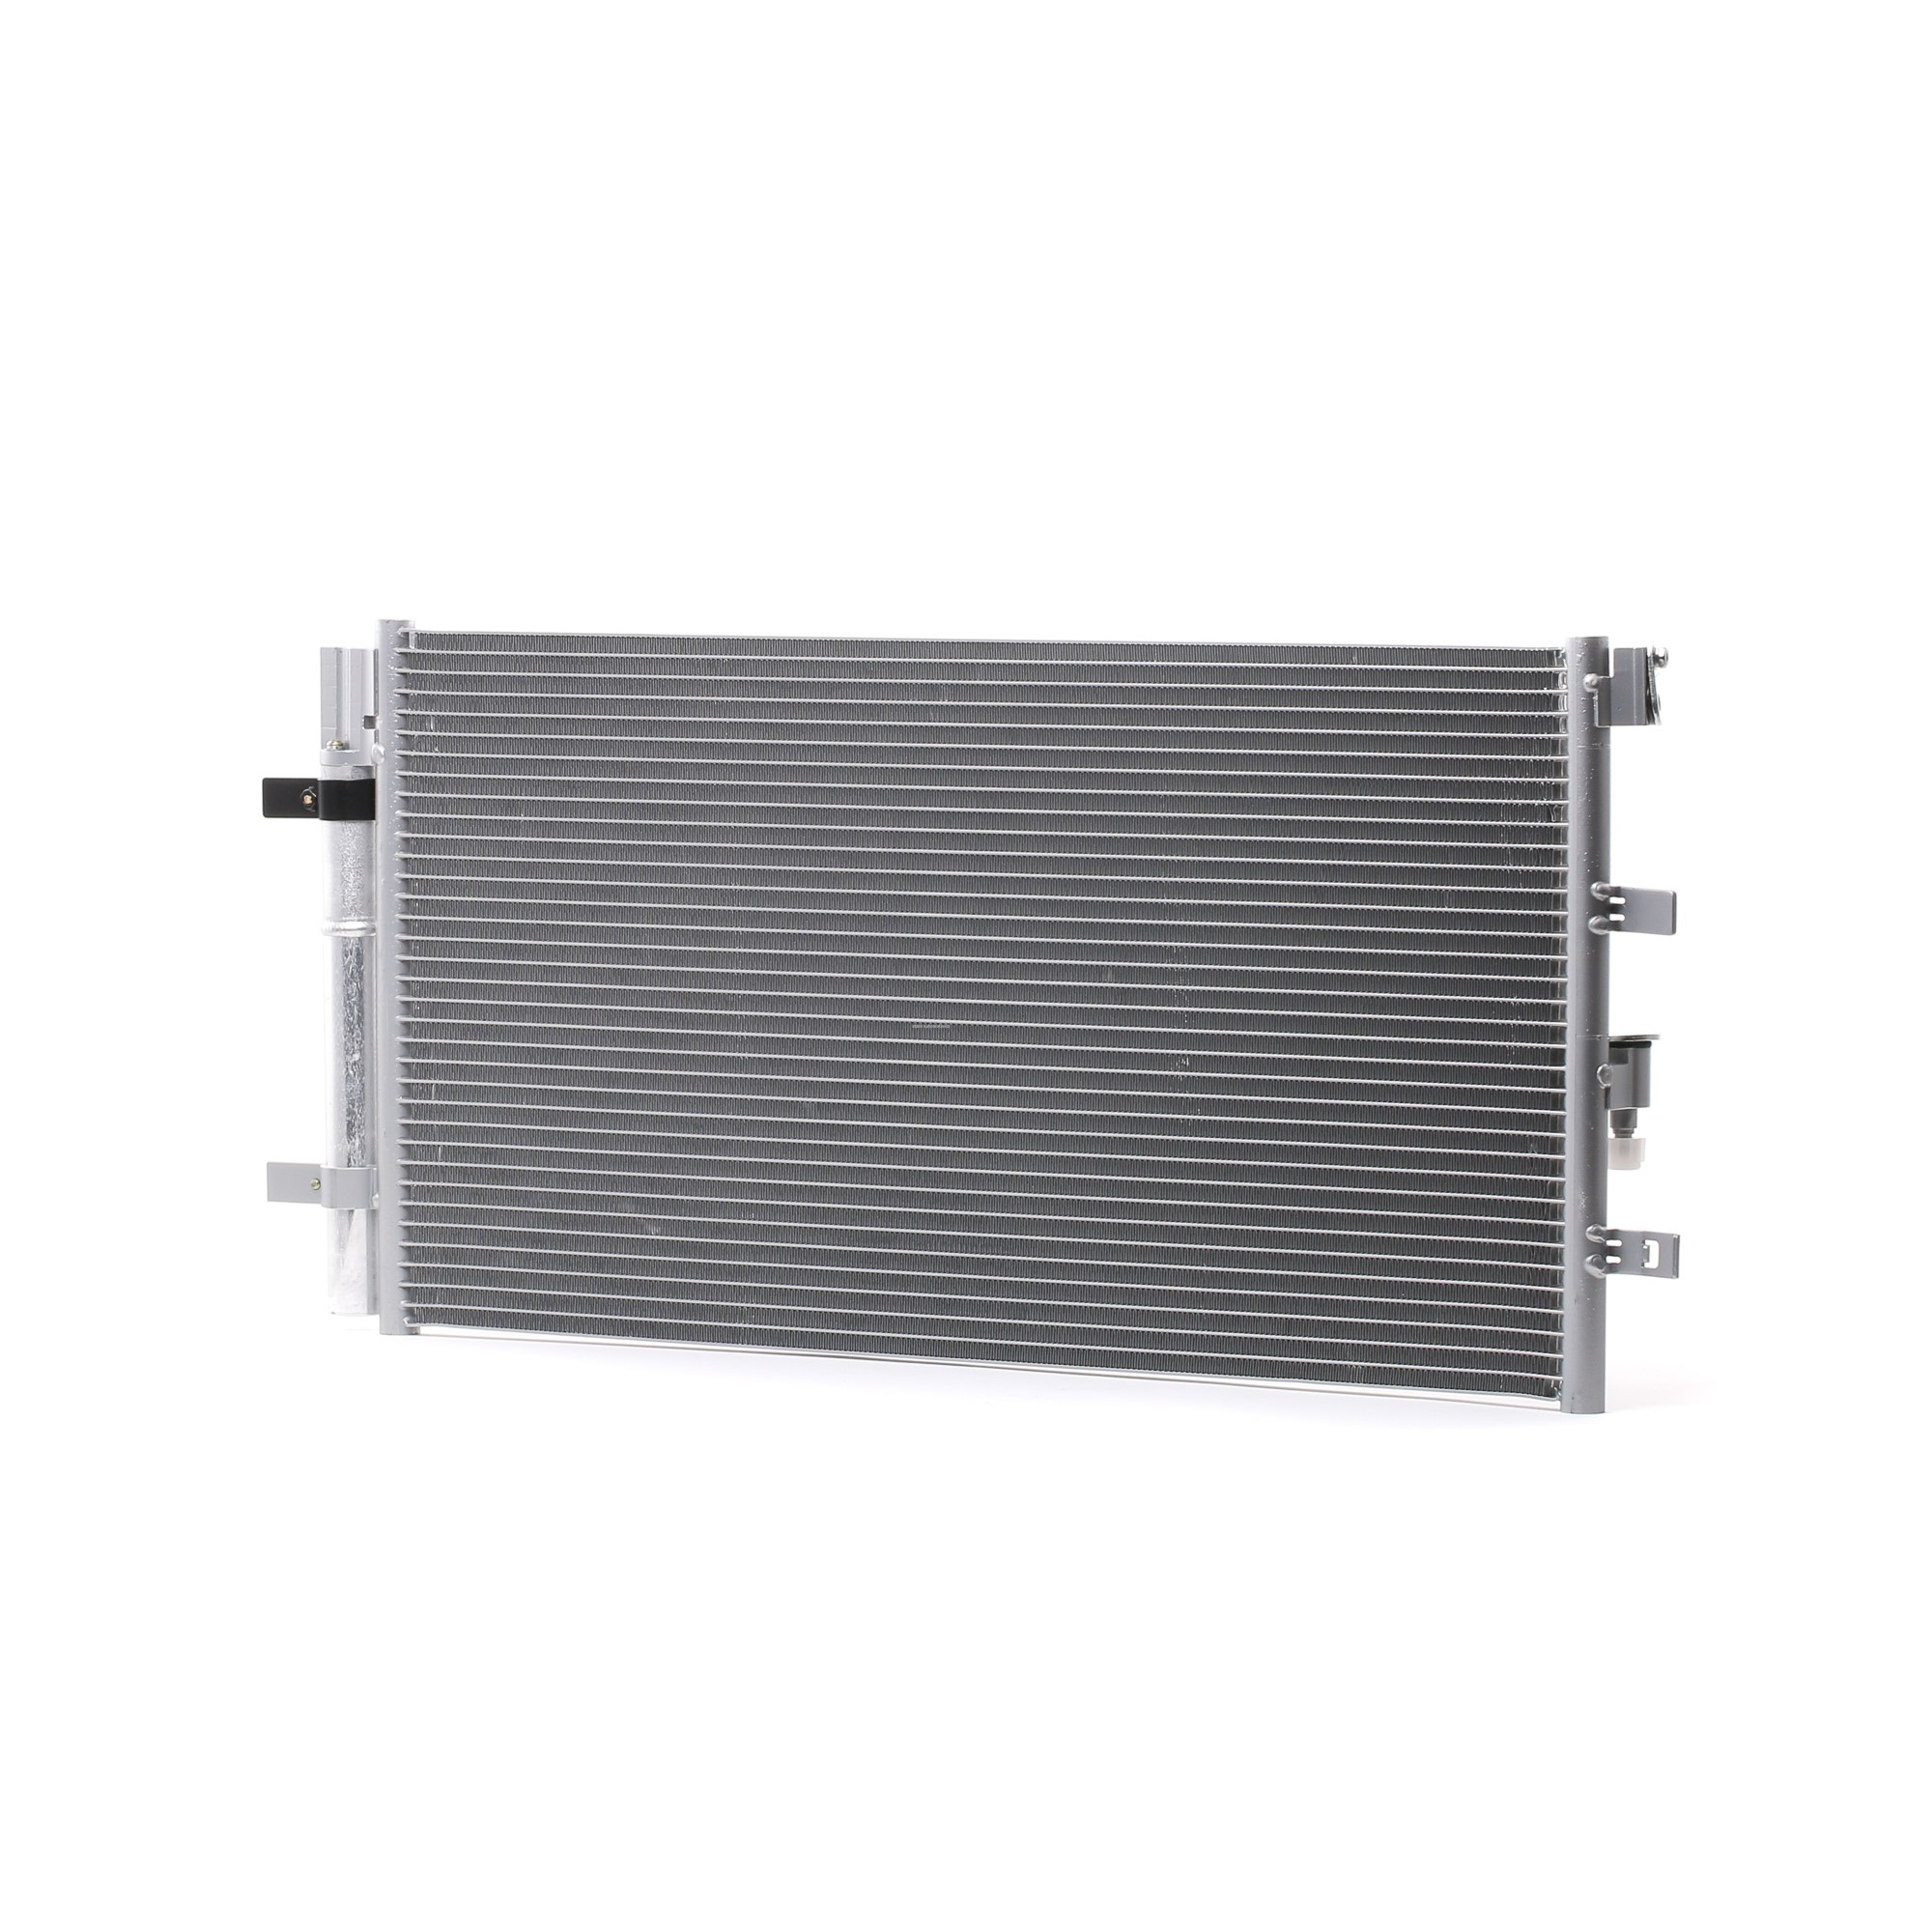 STARK SKCD-0110333 Air conditioning condenser with dryer, 18mm, 15,4mm, Aluminium, R 134a, 341mm